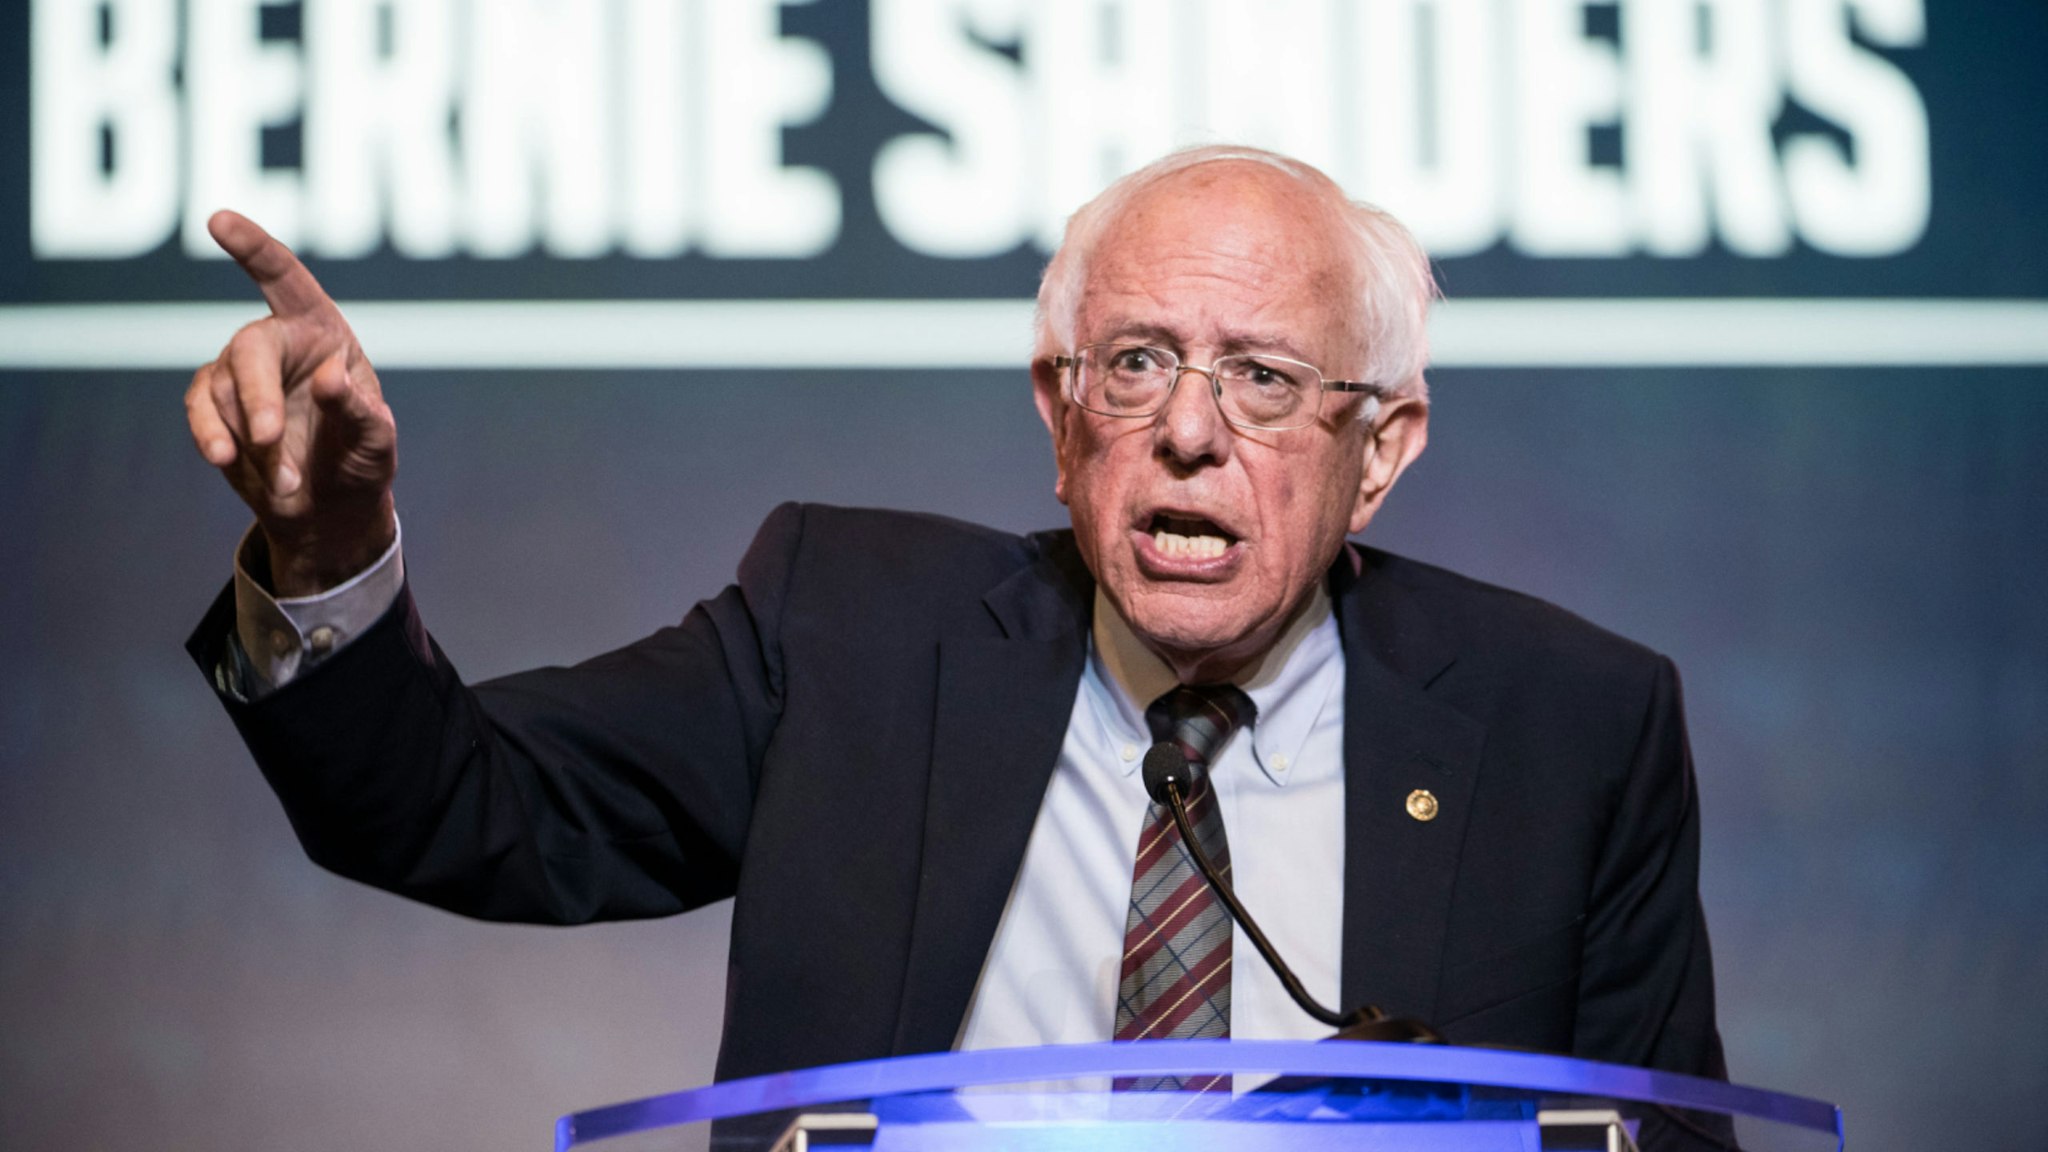 Democratic presidential candidate, Sen. Bernie Sanders (I-VT) speaks to the crowd during the 2019 South Carolina Democratic Party State Convention on June 22, 2019 in Columbia, South Carolina.